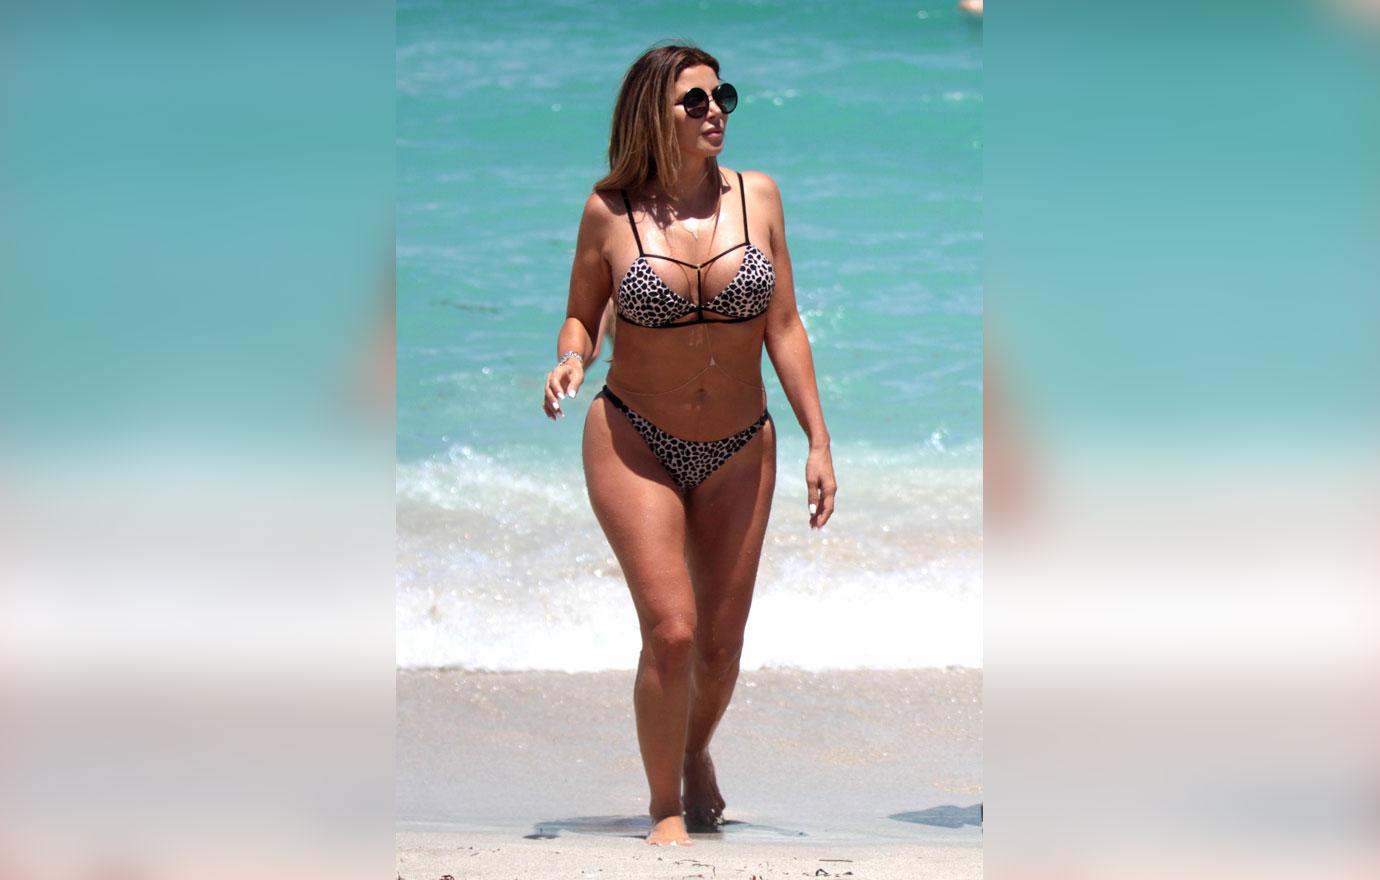 Larsa Pippen's bikini snap sparks outrage and an unexpected family